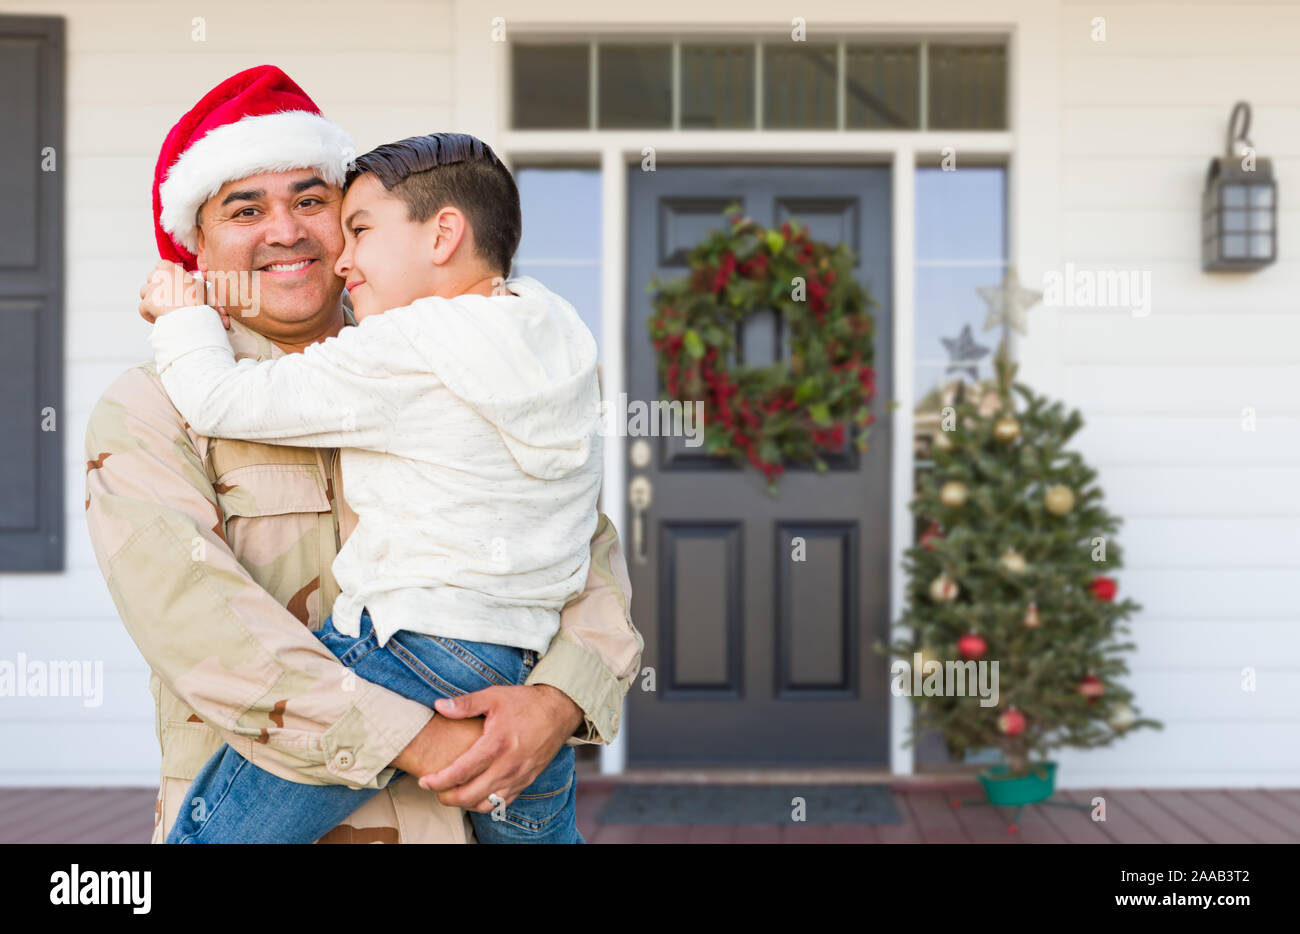 Hispanic Male Soldier Wearing Santa Cap Holding Mixed Race Son In Front of House. Stock Photo